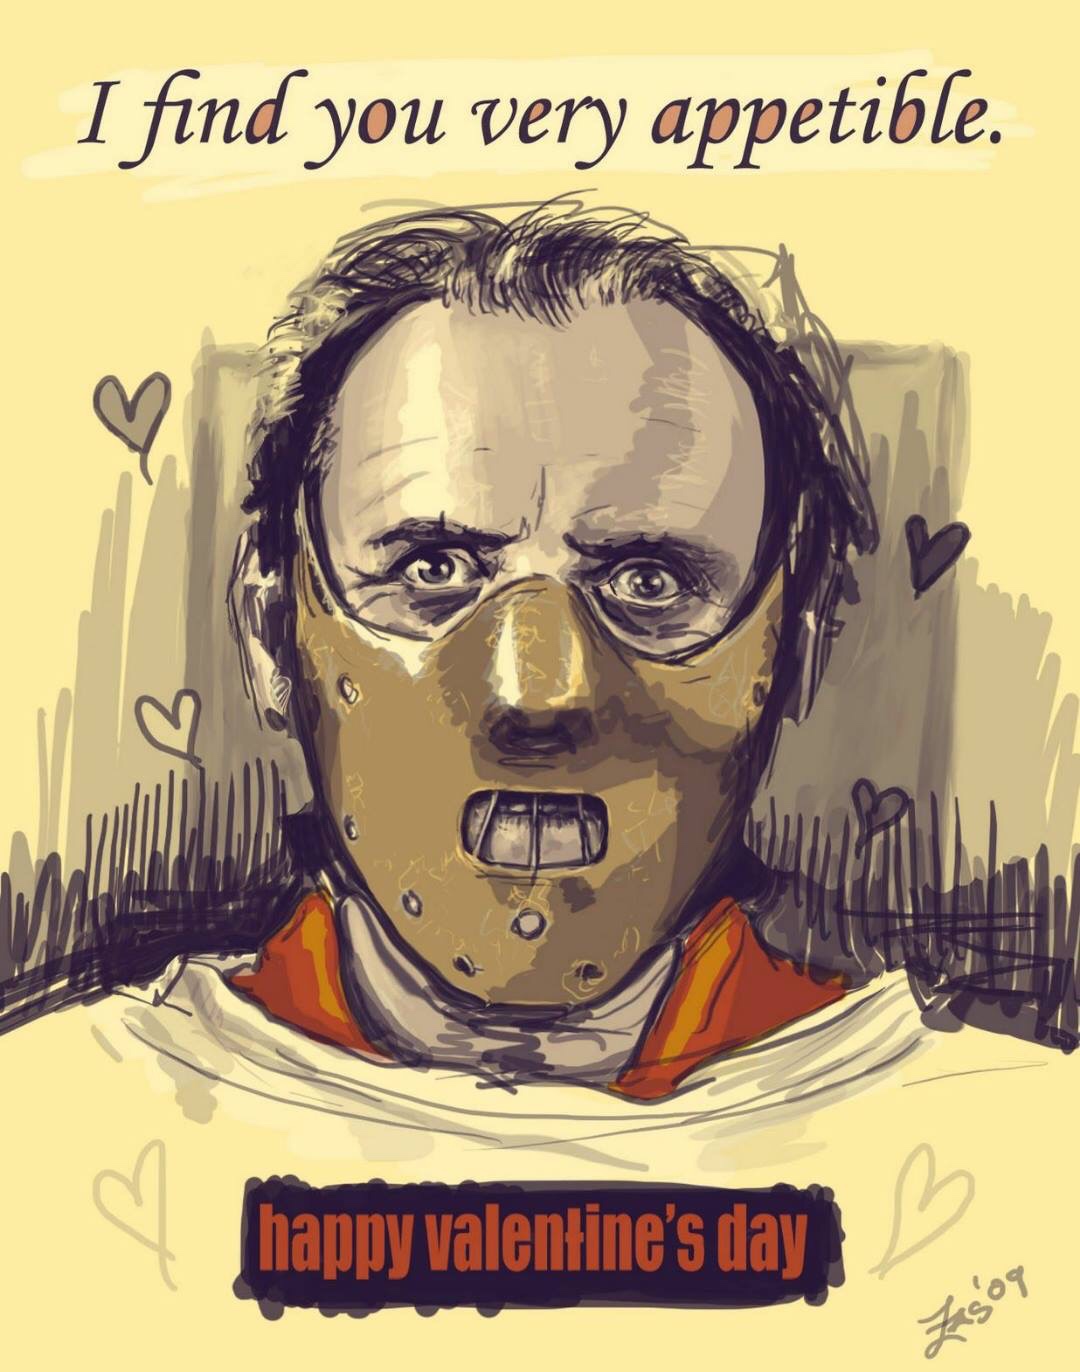 memes - horror valentines day cards - I find you very appetible. happy valentine's day Zagog